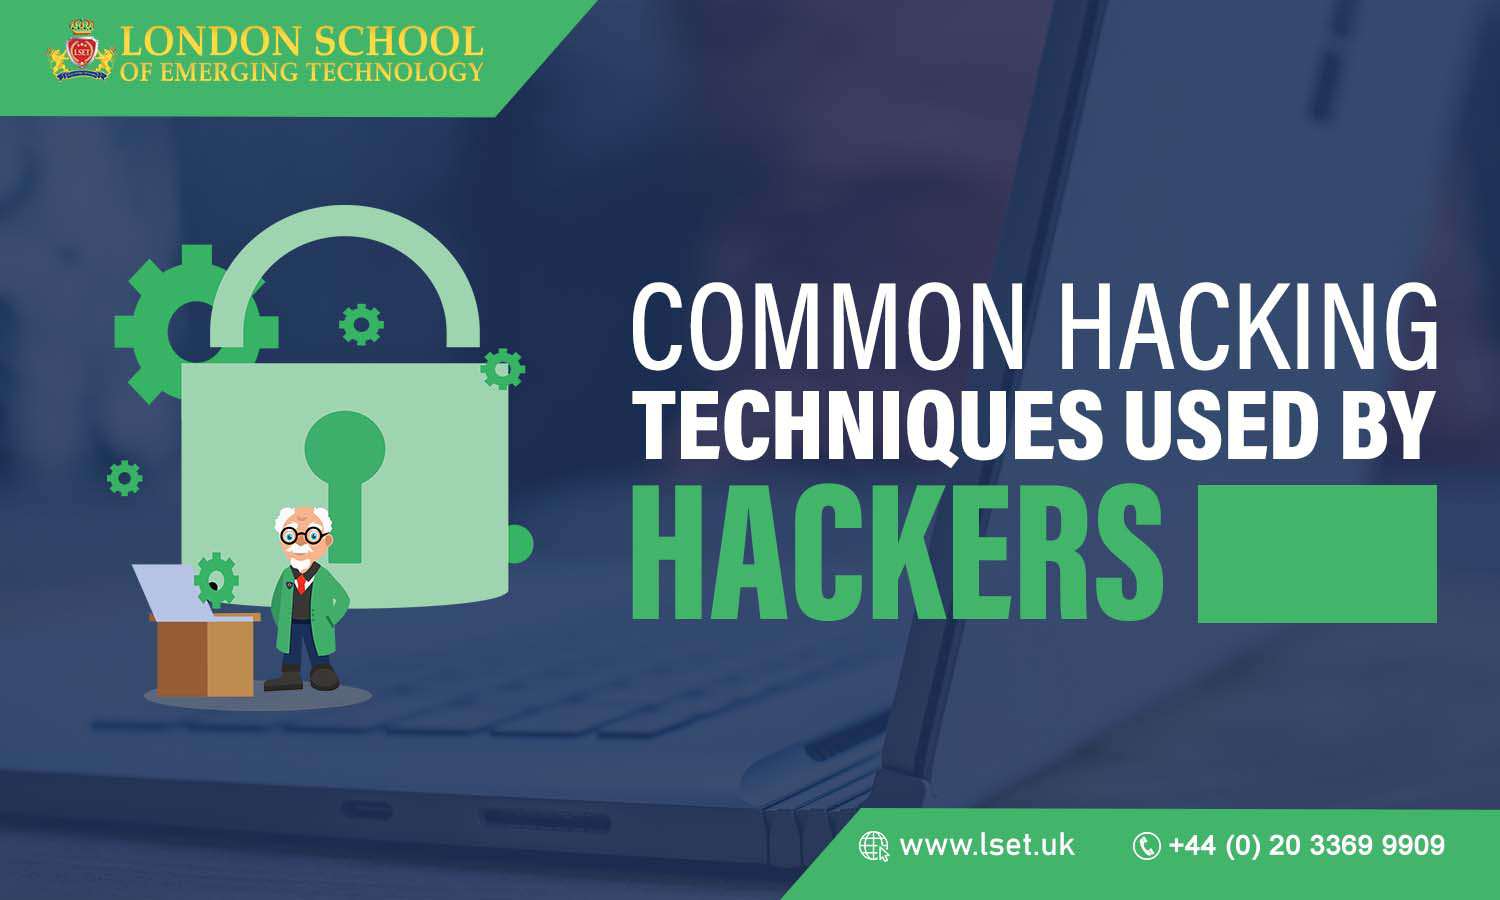 Common Hacking Techniques Used by Hackers